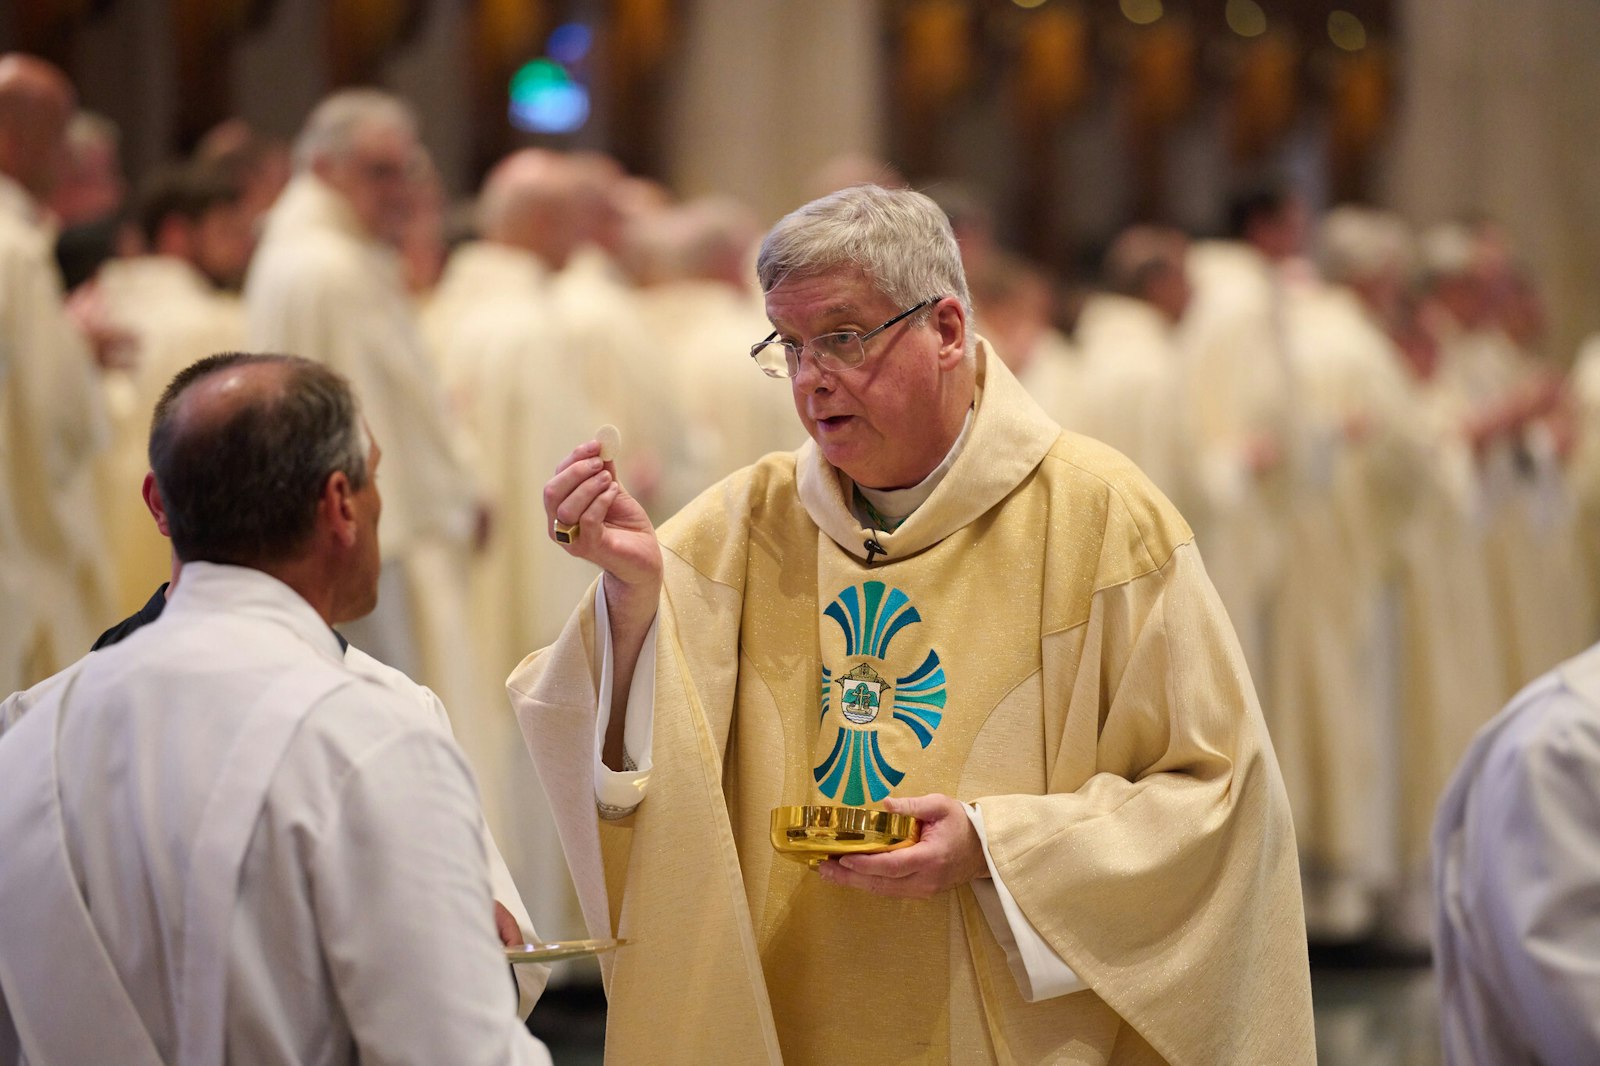 Bishop Battersby offers Communion for the first time as La Crosse's new bishop. The Detroit native and former Detroit auxiliary bishop spoke about the necessity of placing all of one's faith in Jesus during his installation Mass homily.